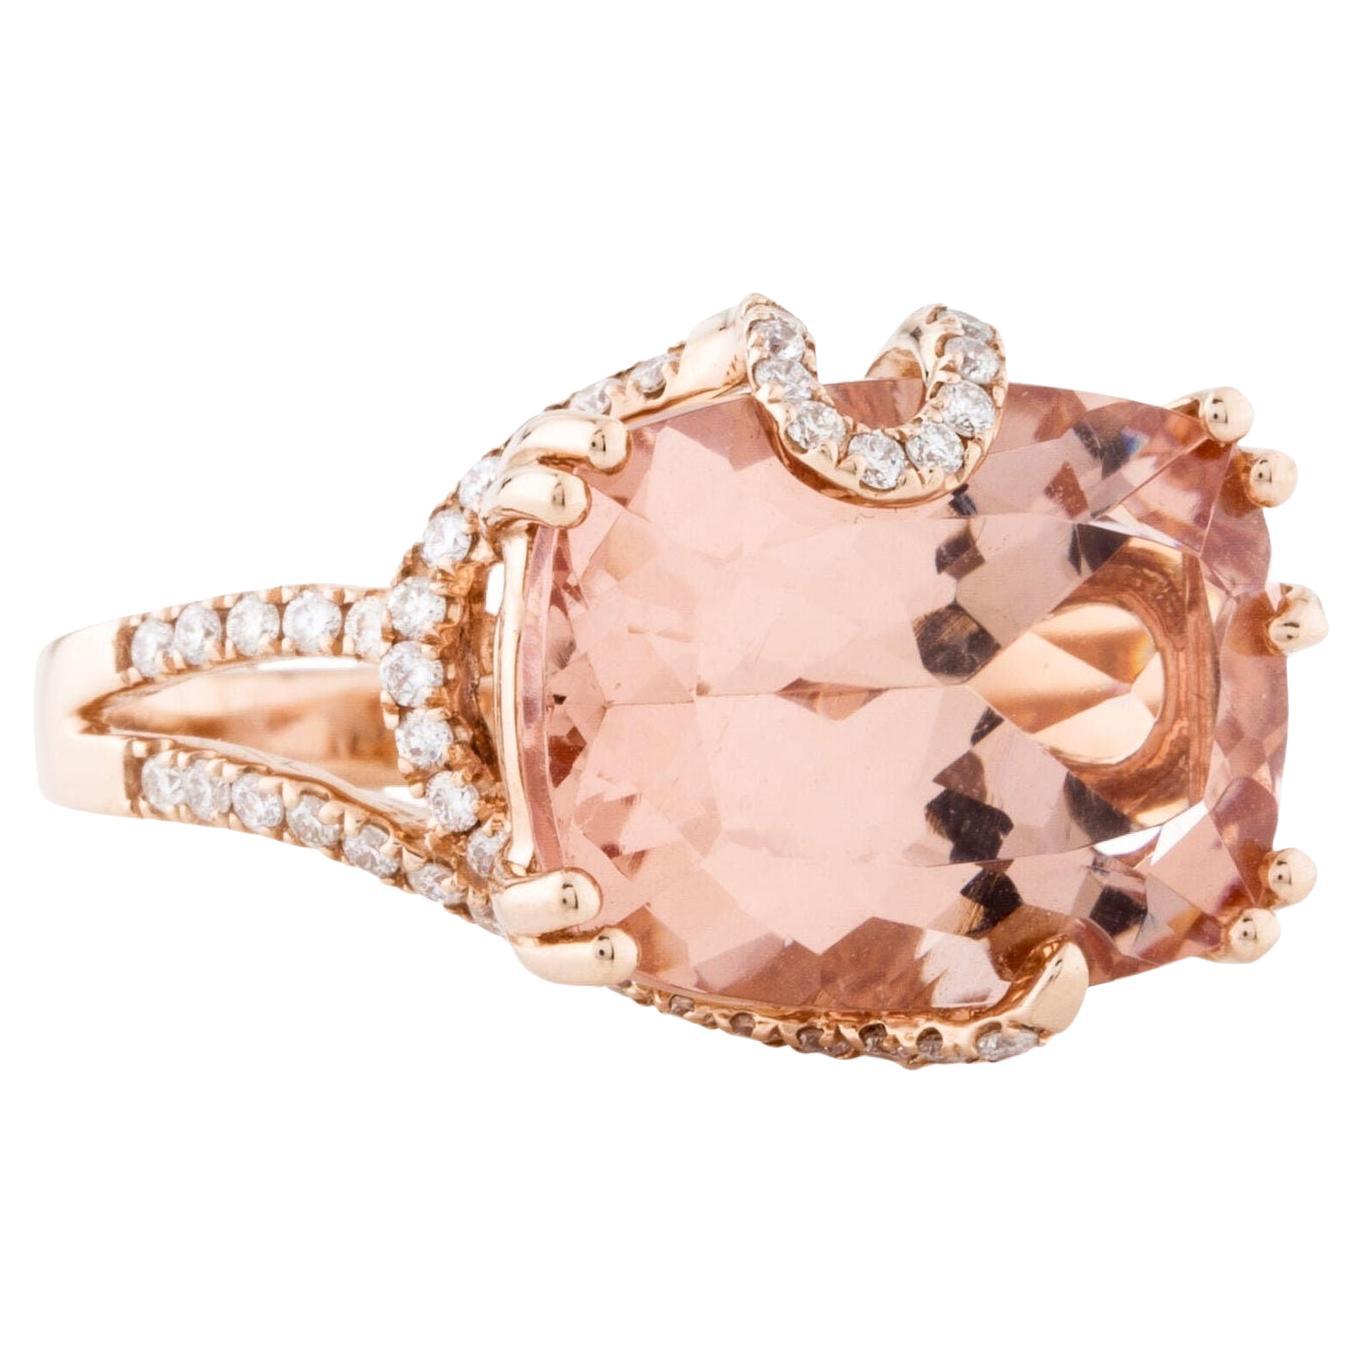 The Rose Gold 12.3 Ct Cushion Morganite Diamond Cocktail Ring For Sale